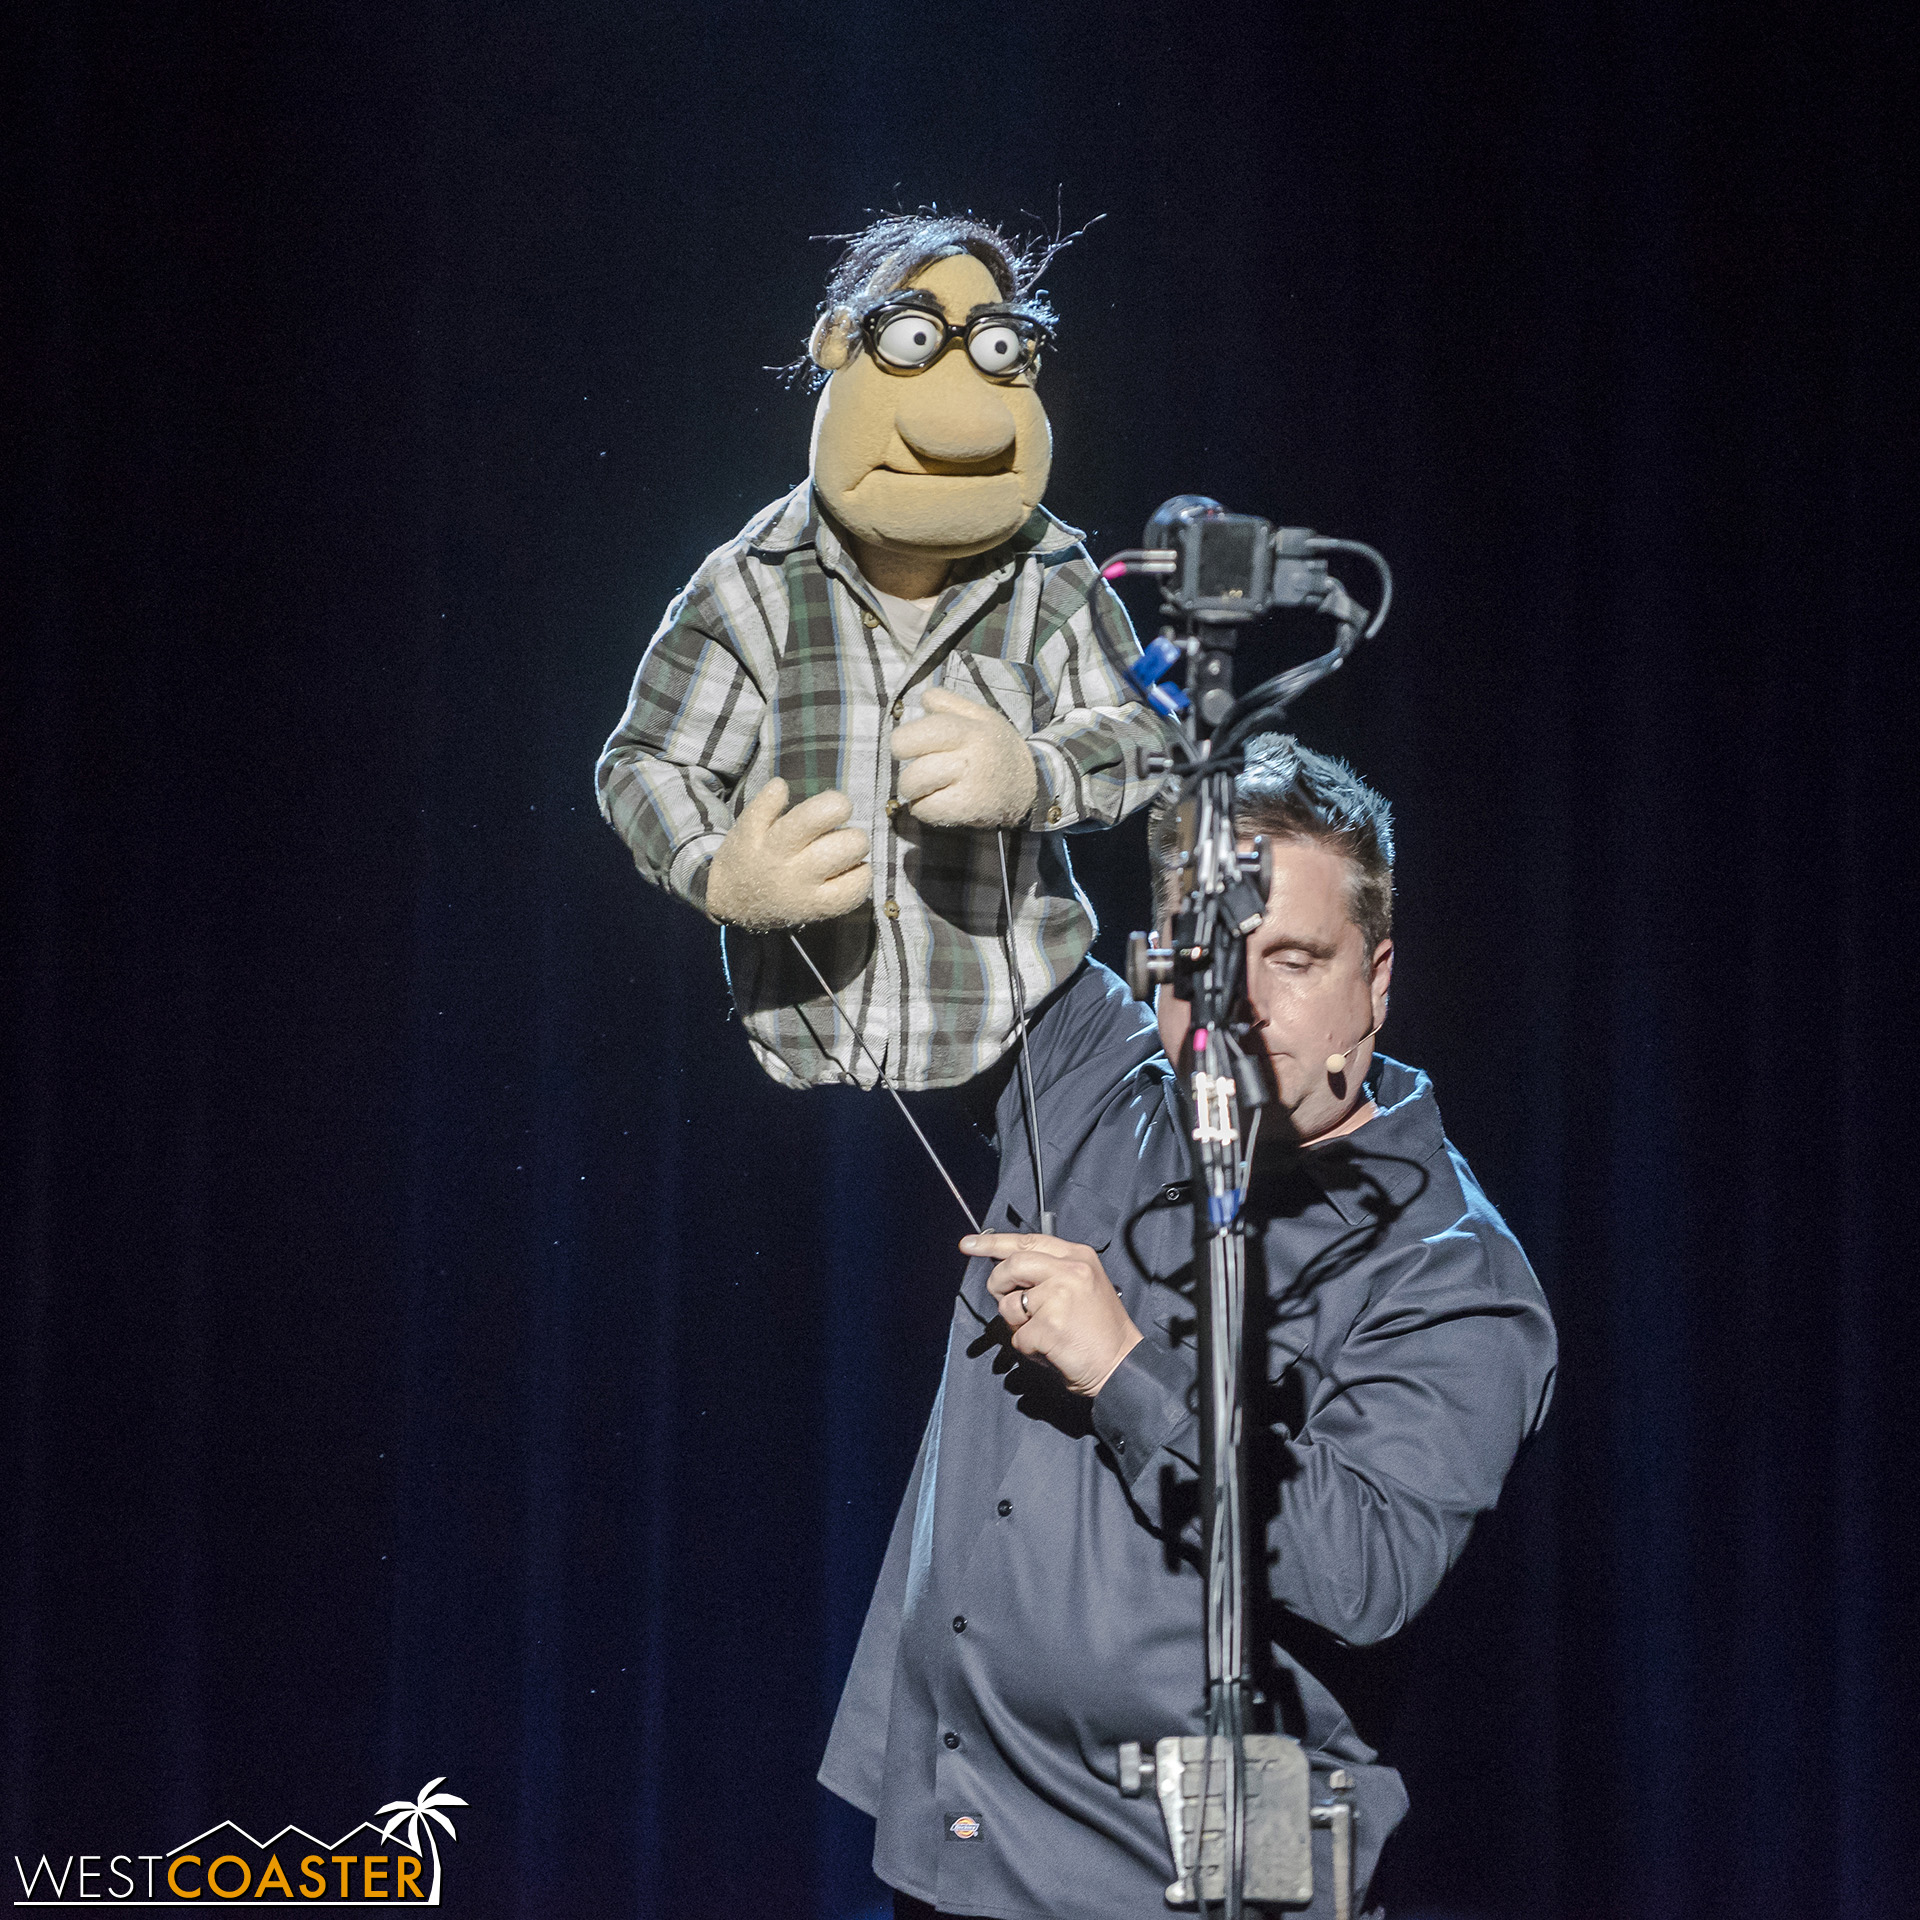  Grant Baciocco’s Muppet explains what Puppet Up is all about. 